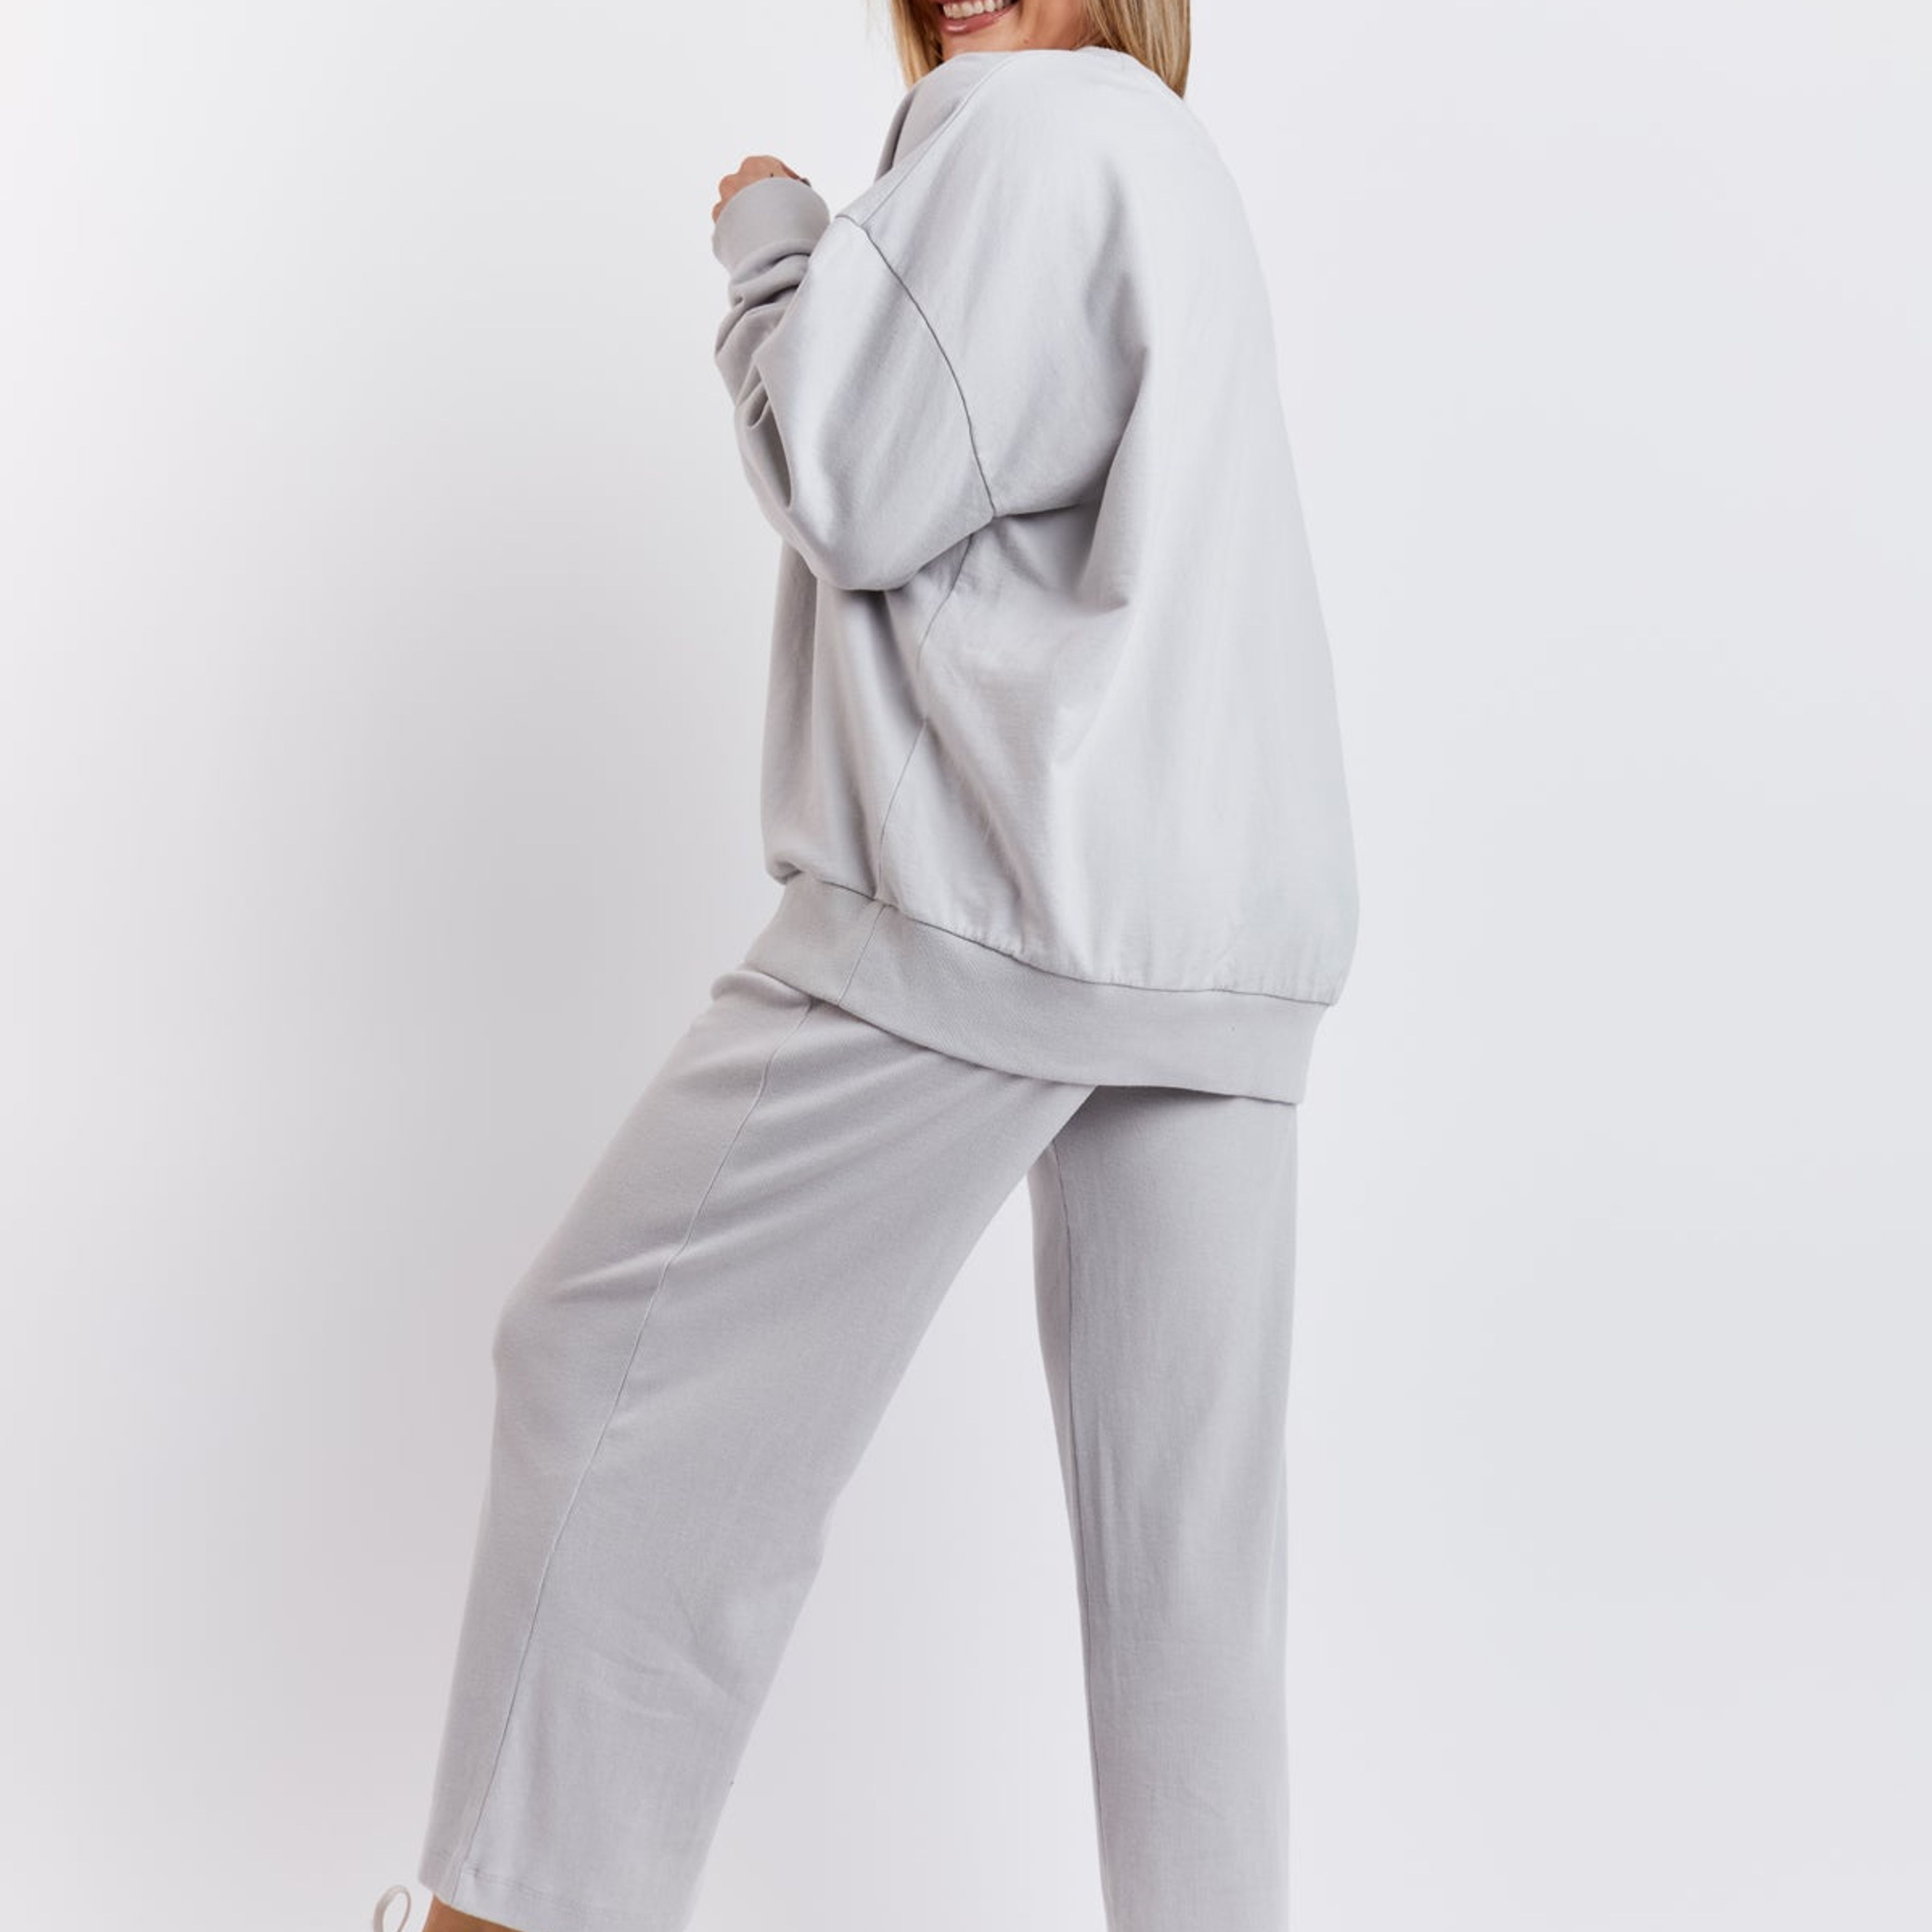 Homebody Cropped Lounge Pant